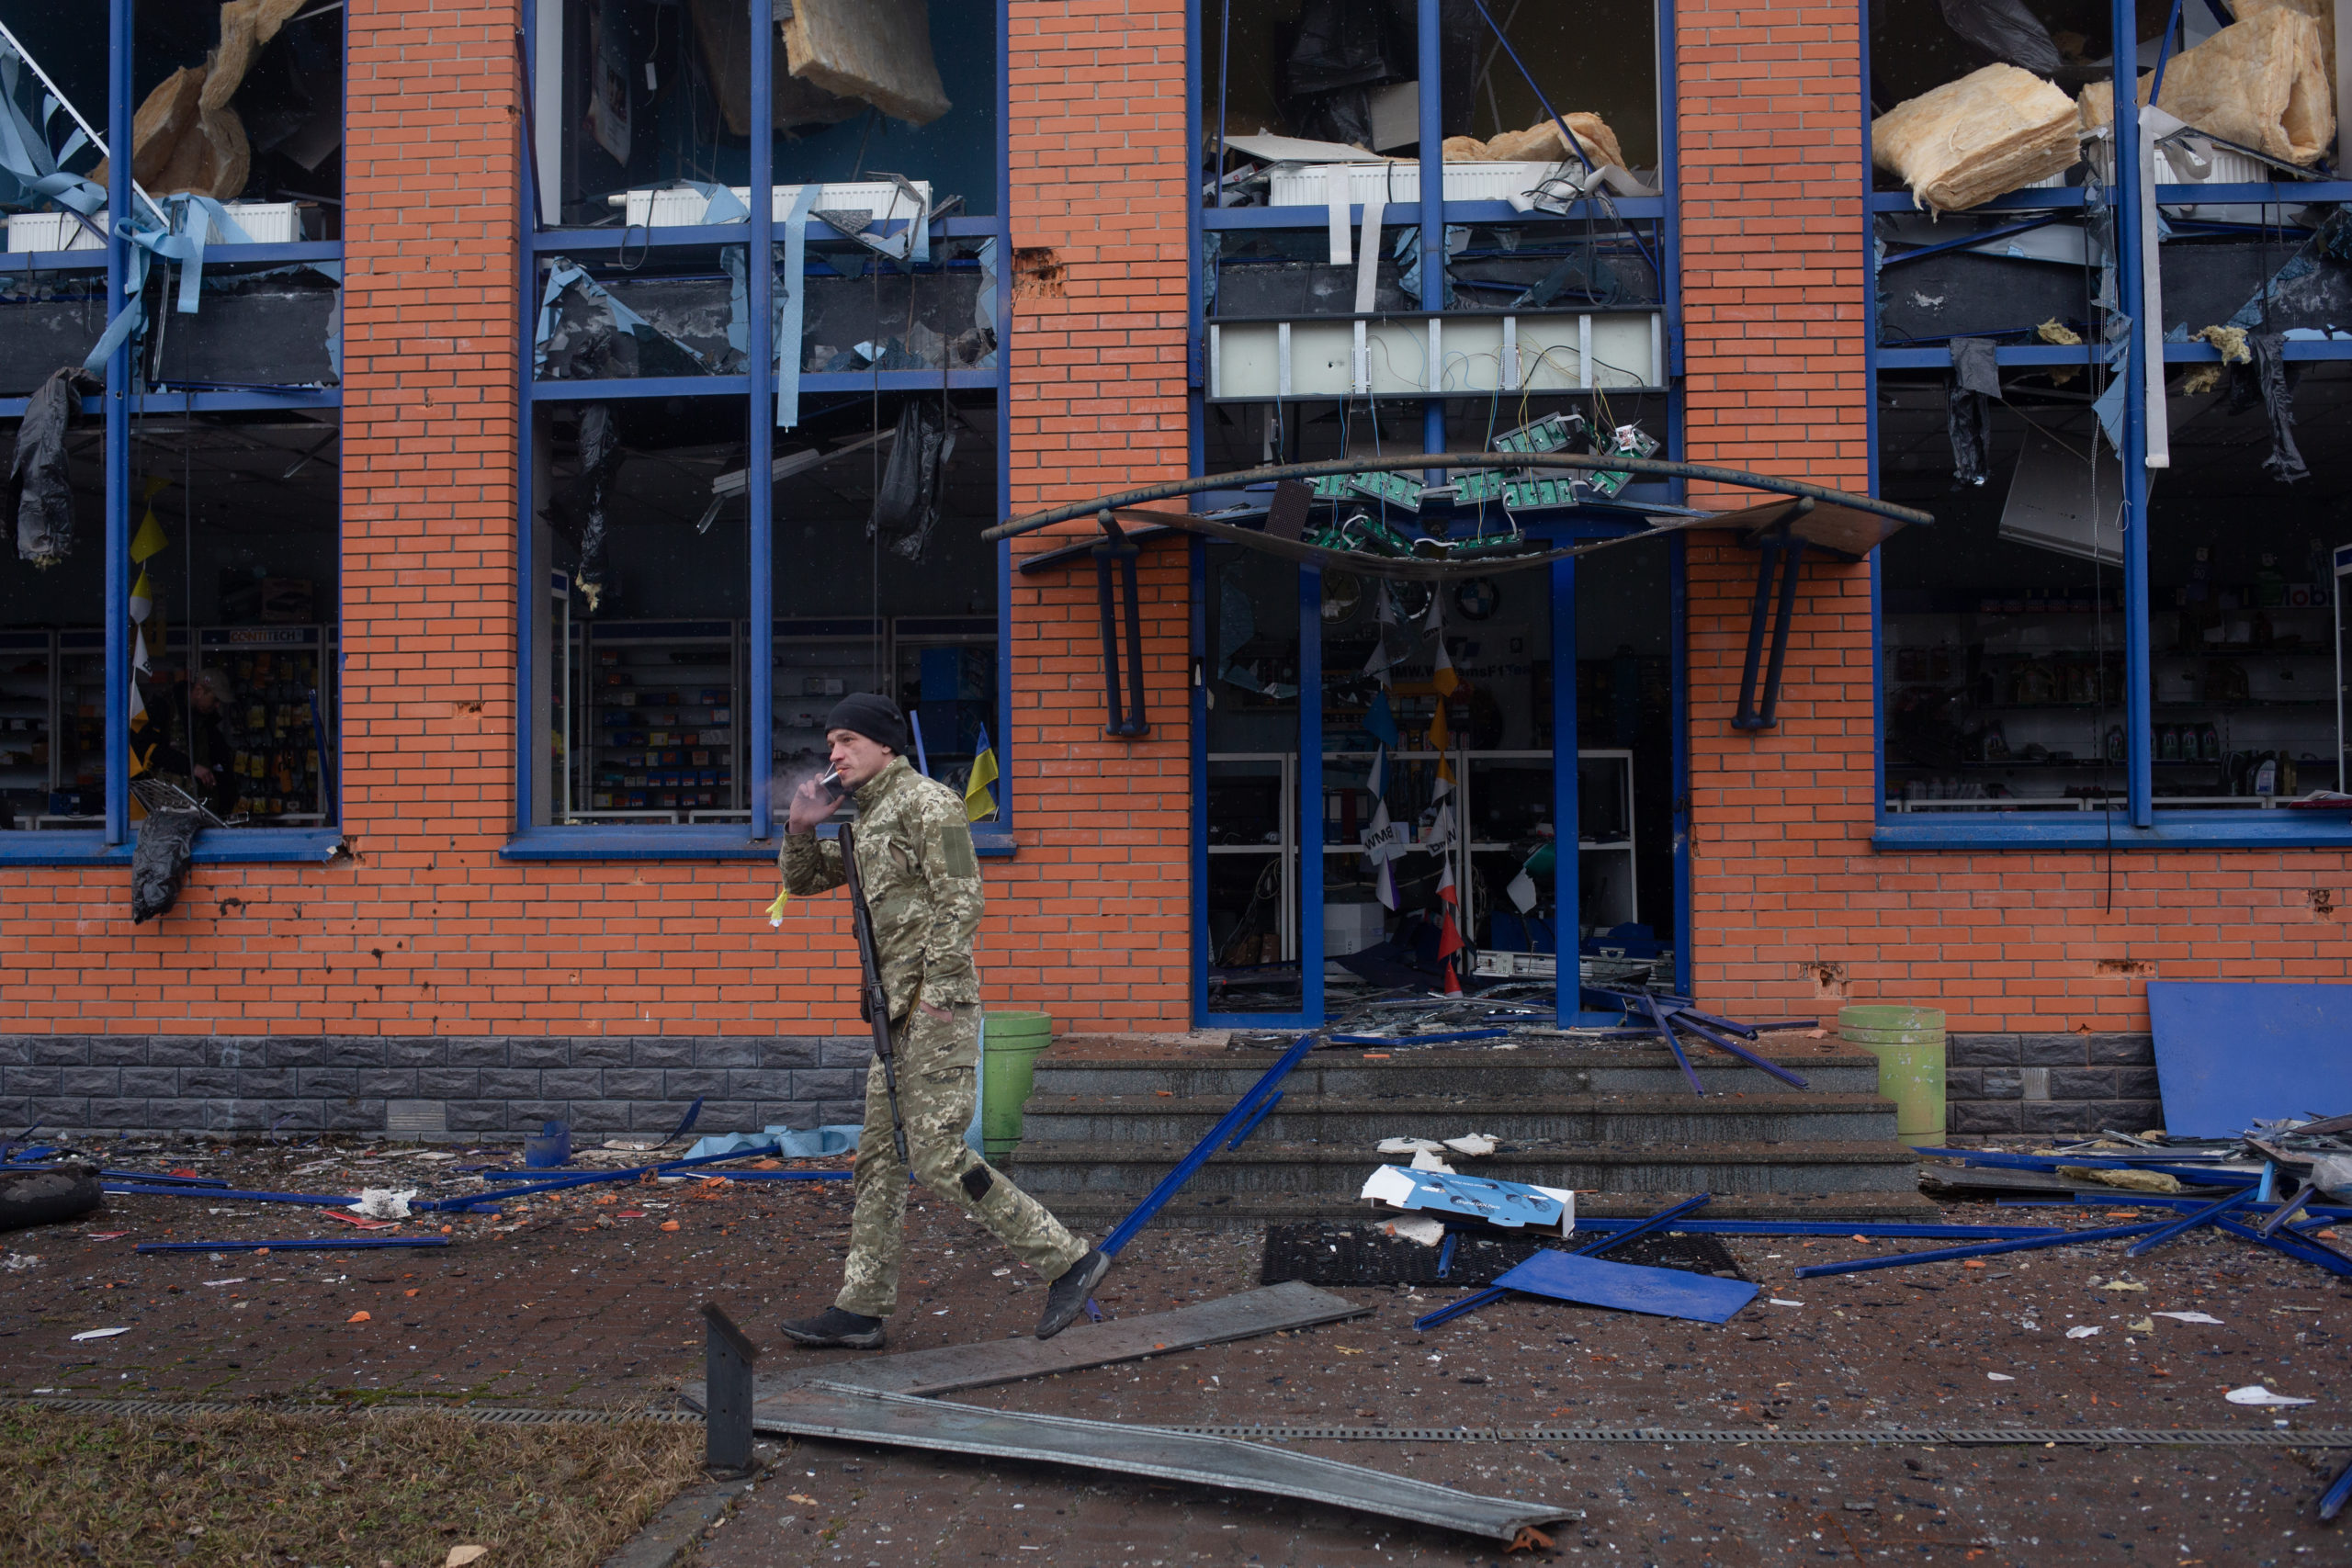 A Ukrainian soldier walks by a shelled store in Kyiv, Ukraine, on Wednesday. (Anastasia Vlasova/Getty Images)